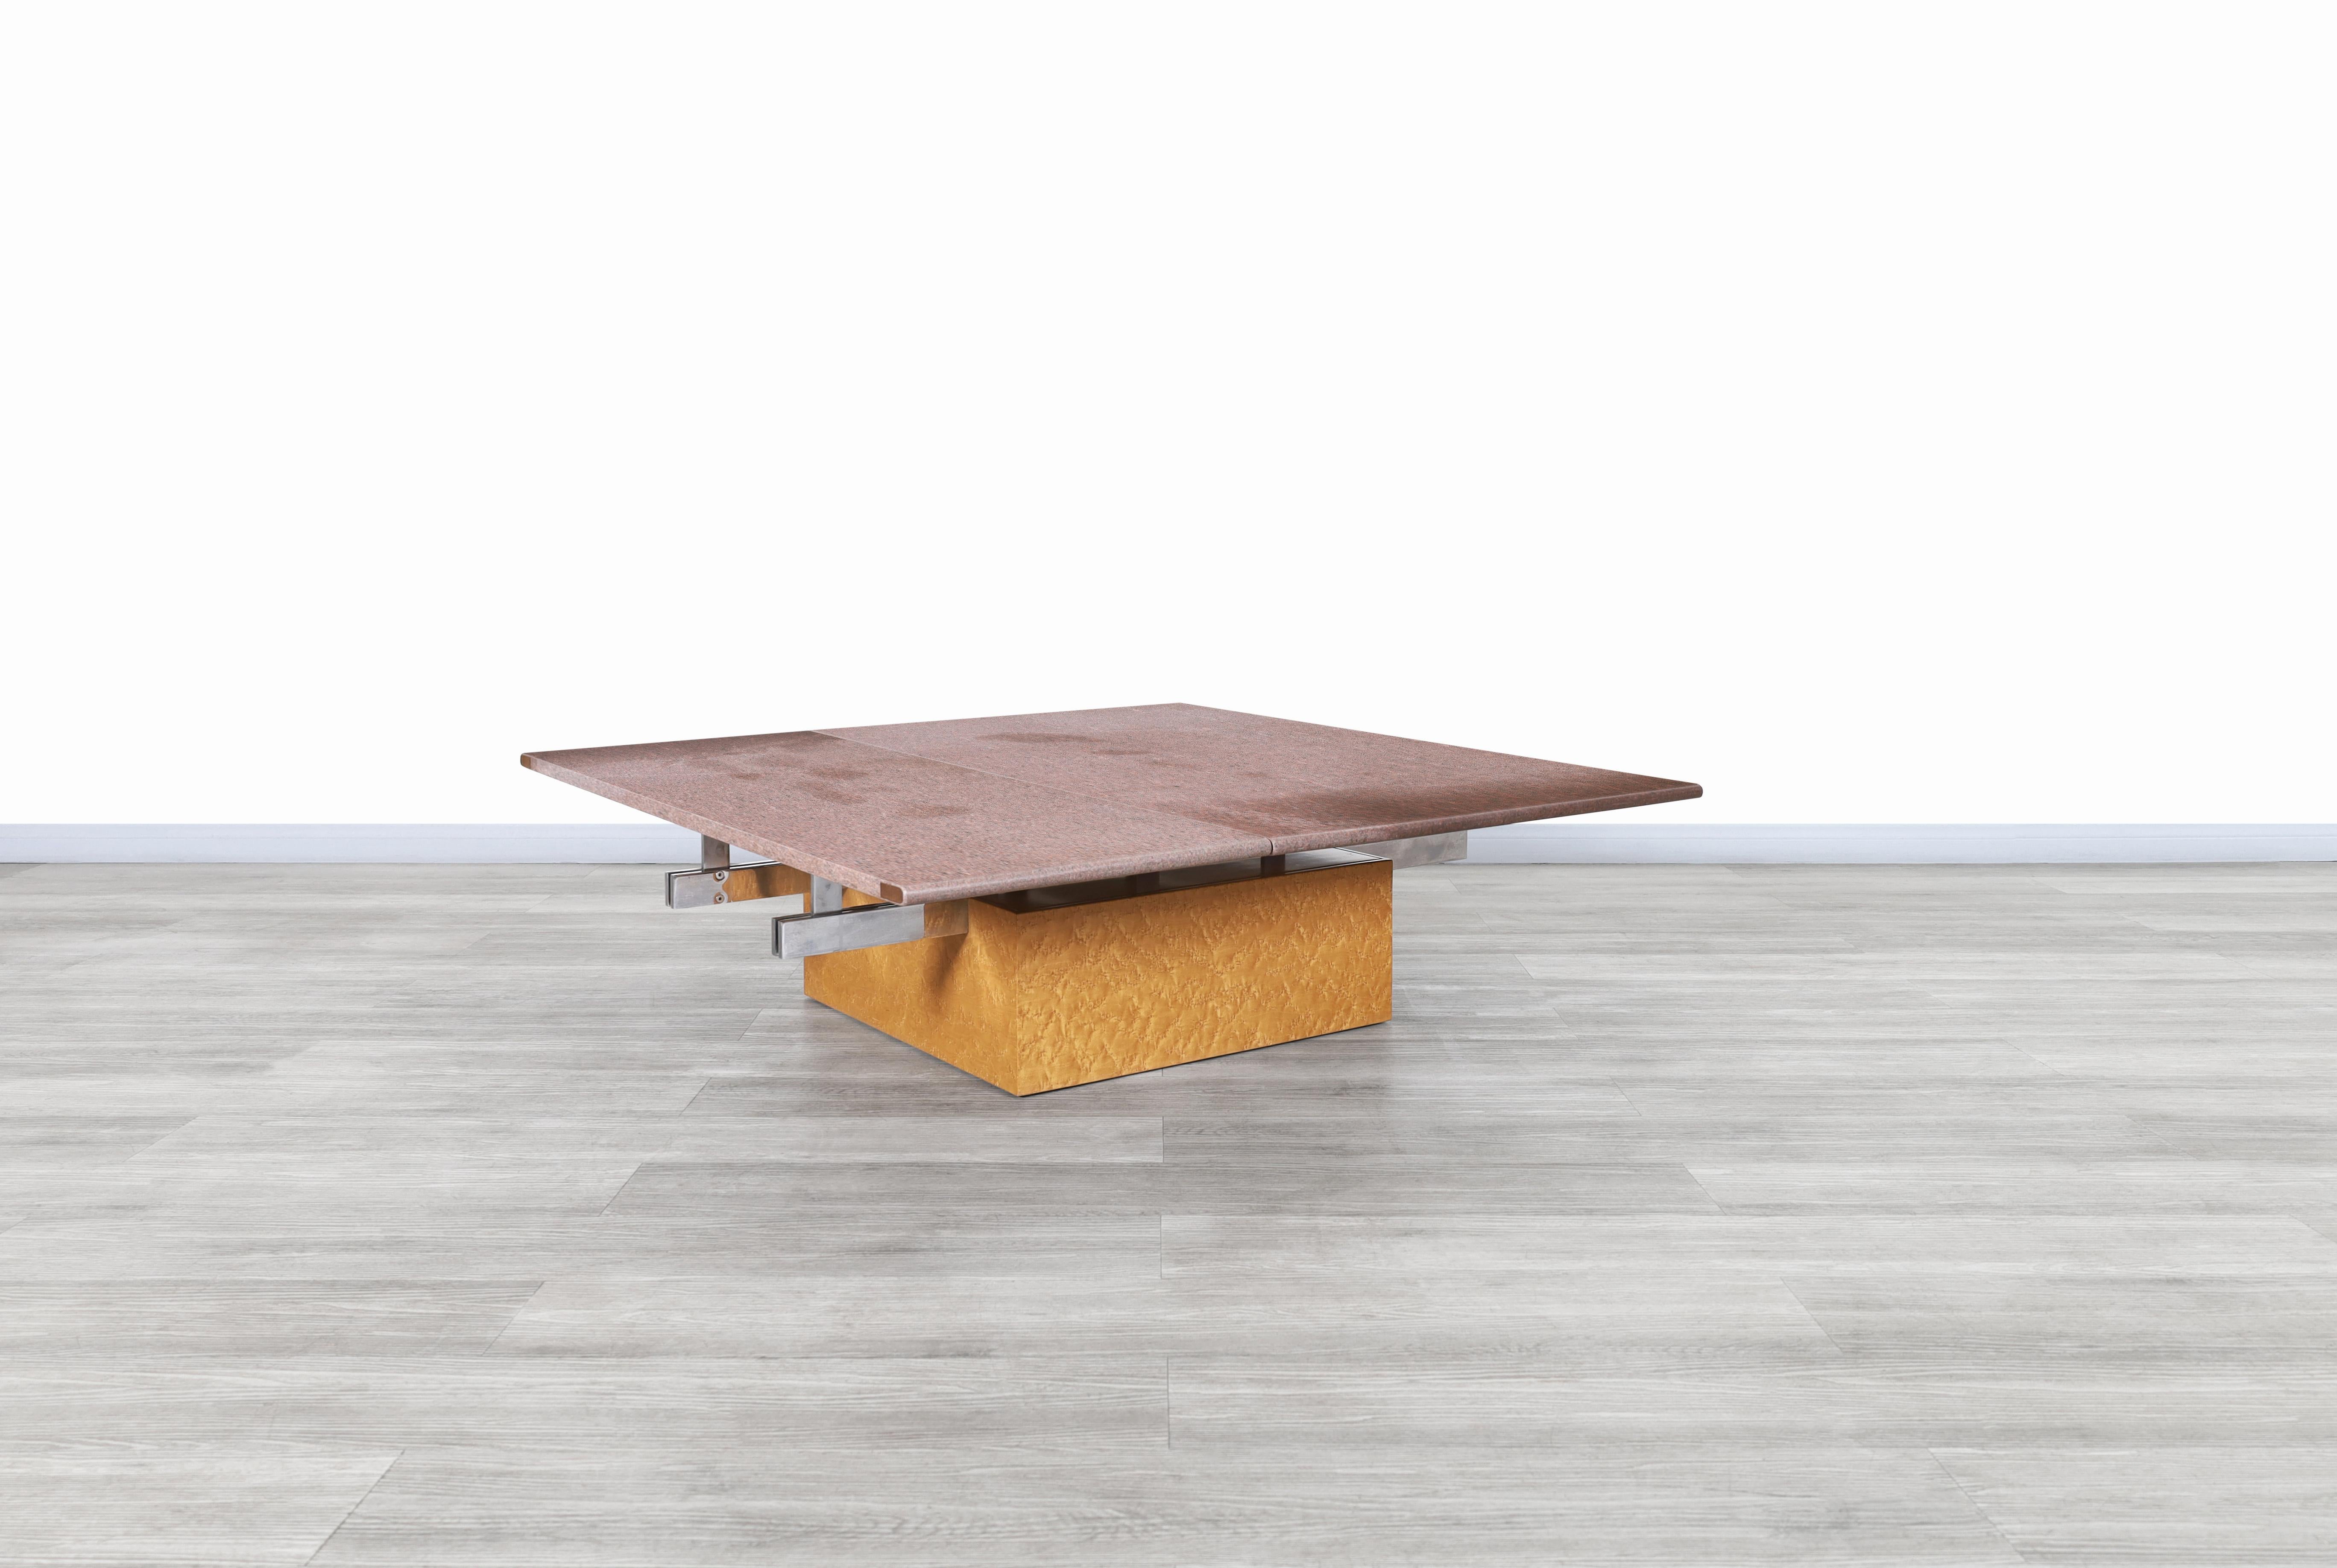 Stunning vintage Italian adjustable bird's-eye maple and granite coffee table designed by Giovanni Offredi for Saporiti in Italy, circa 1980s. This table has a fascinating design, where the materials used in its construction stand out combined with